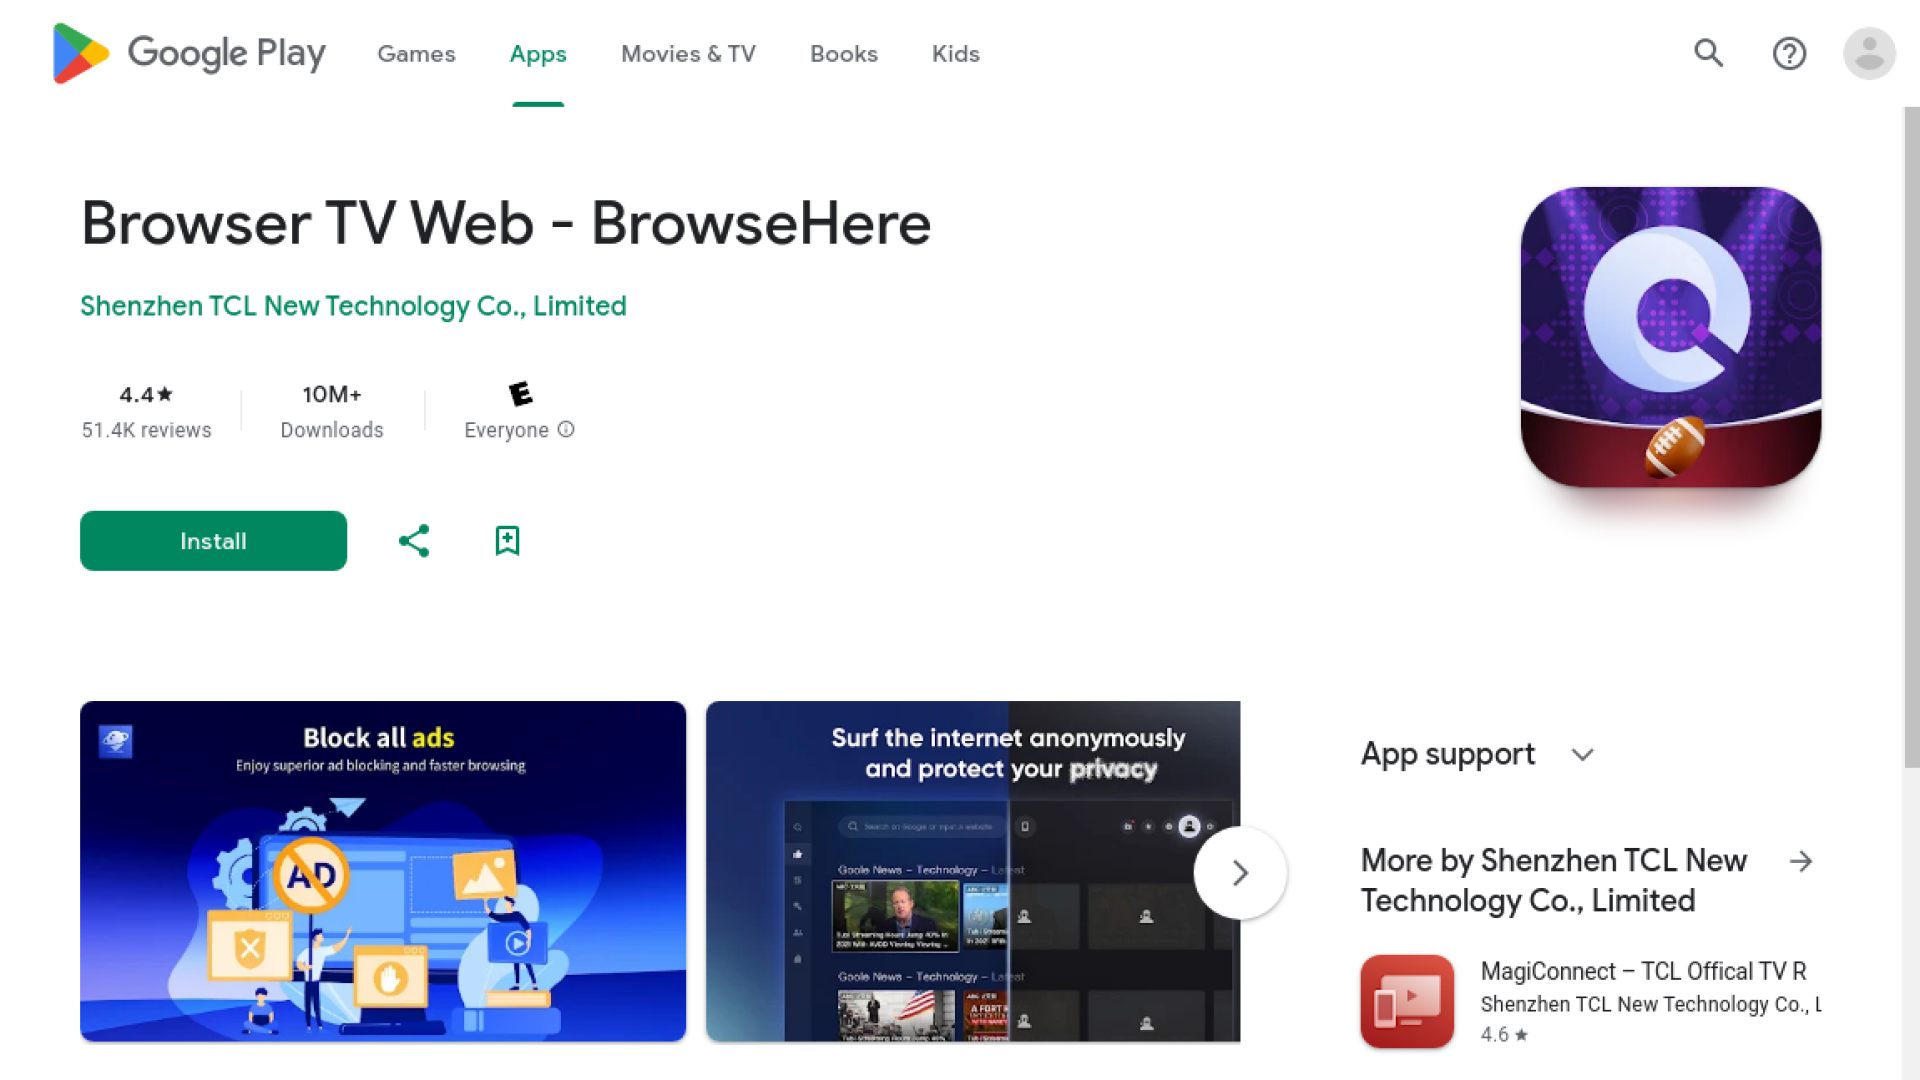 Browser TV Web - BrowseHere